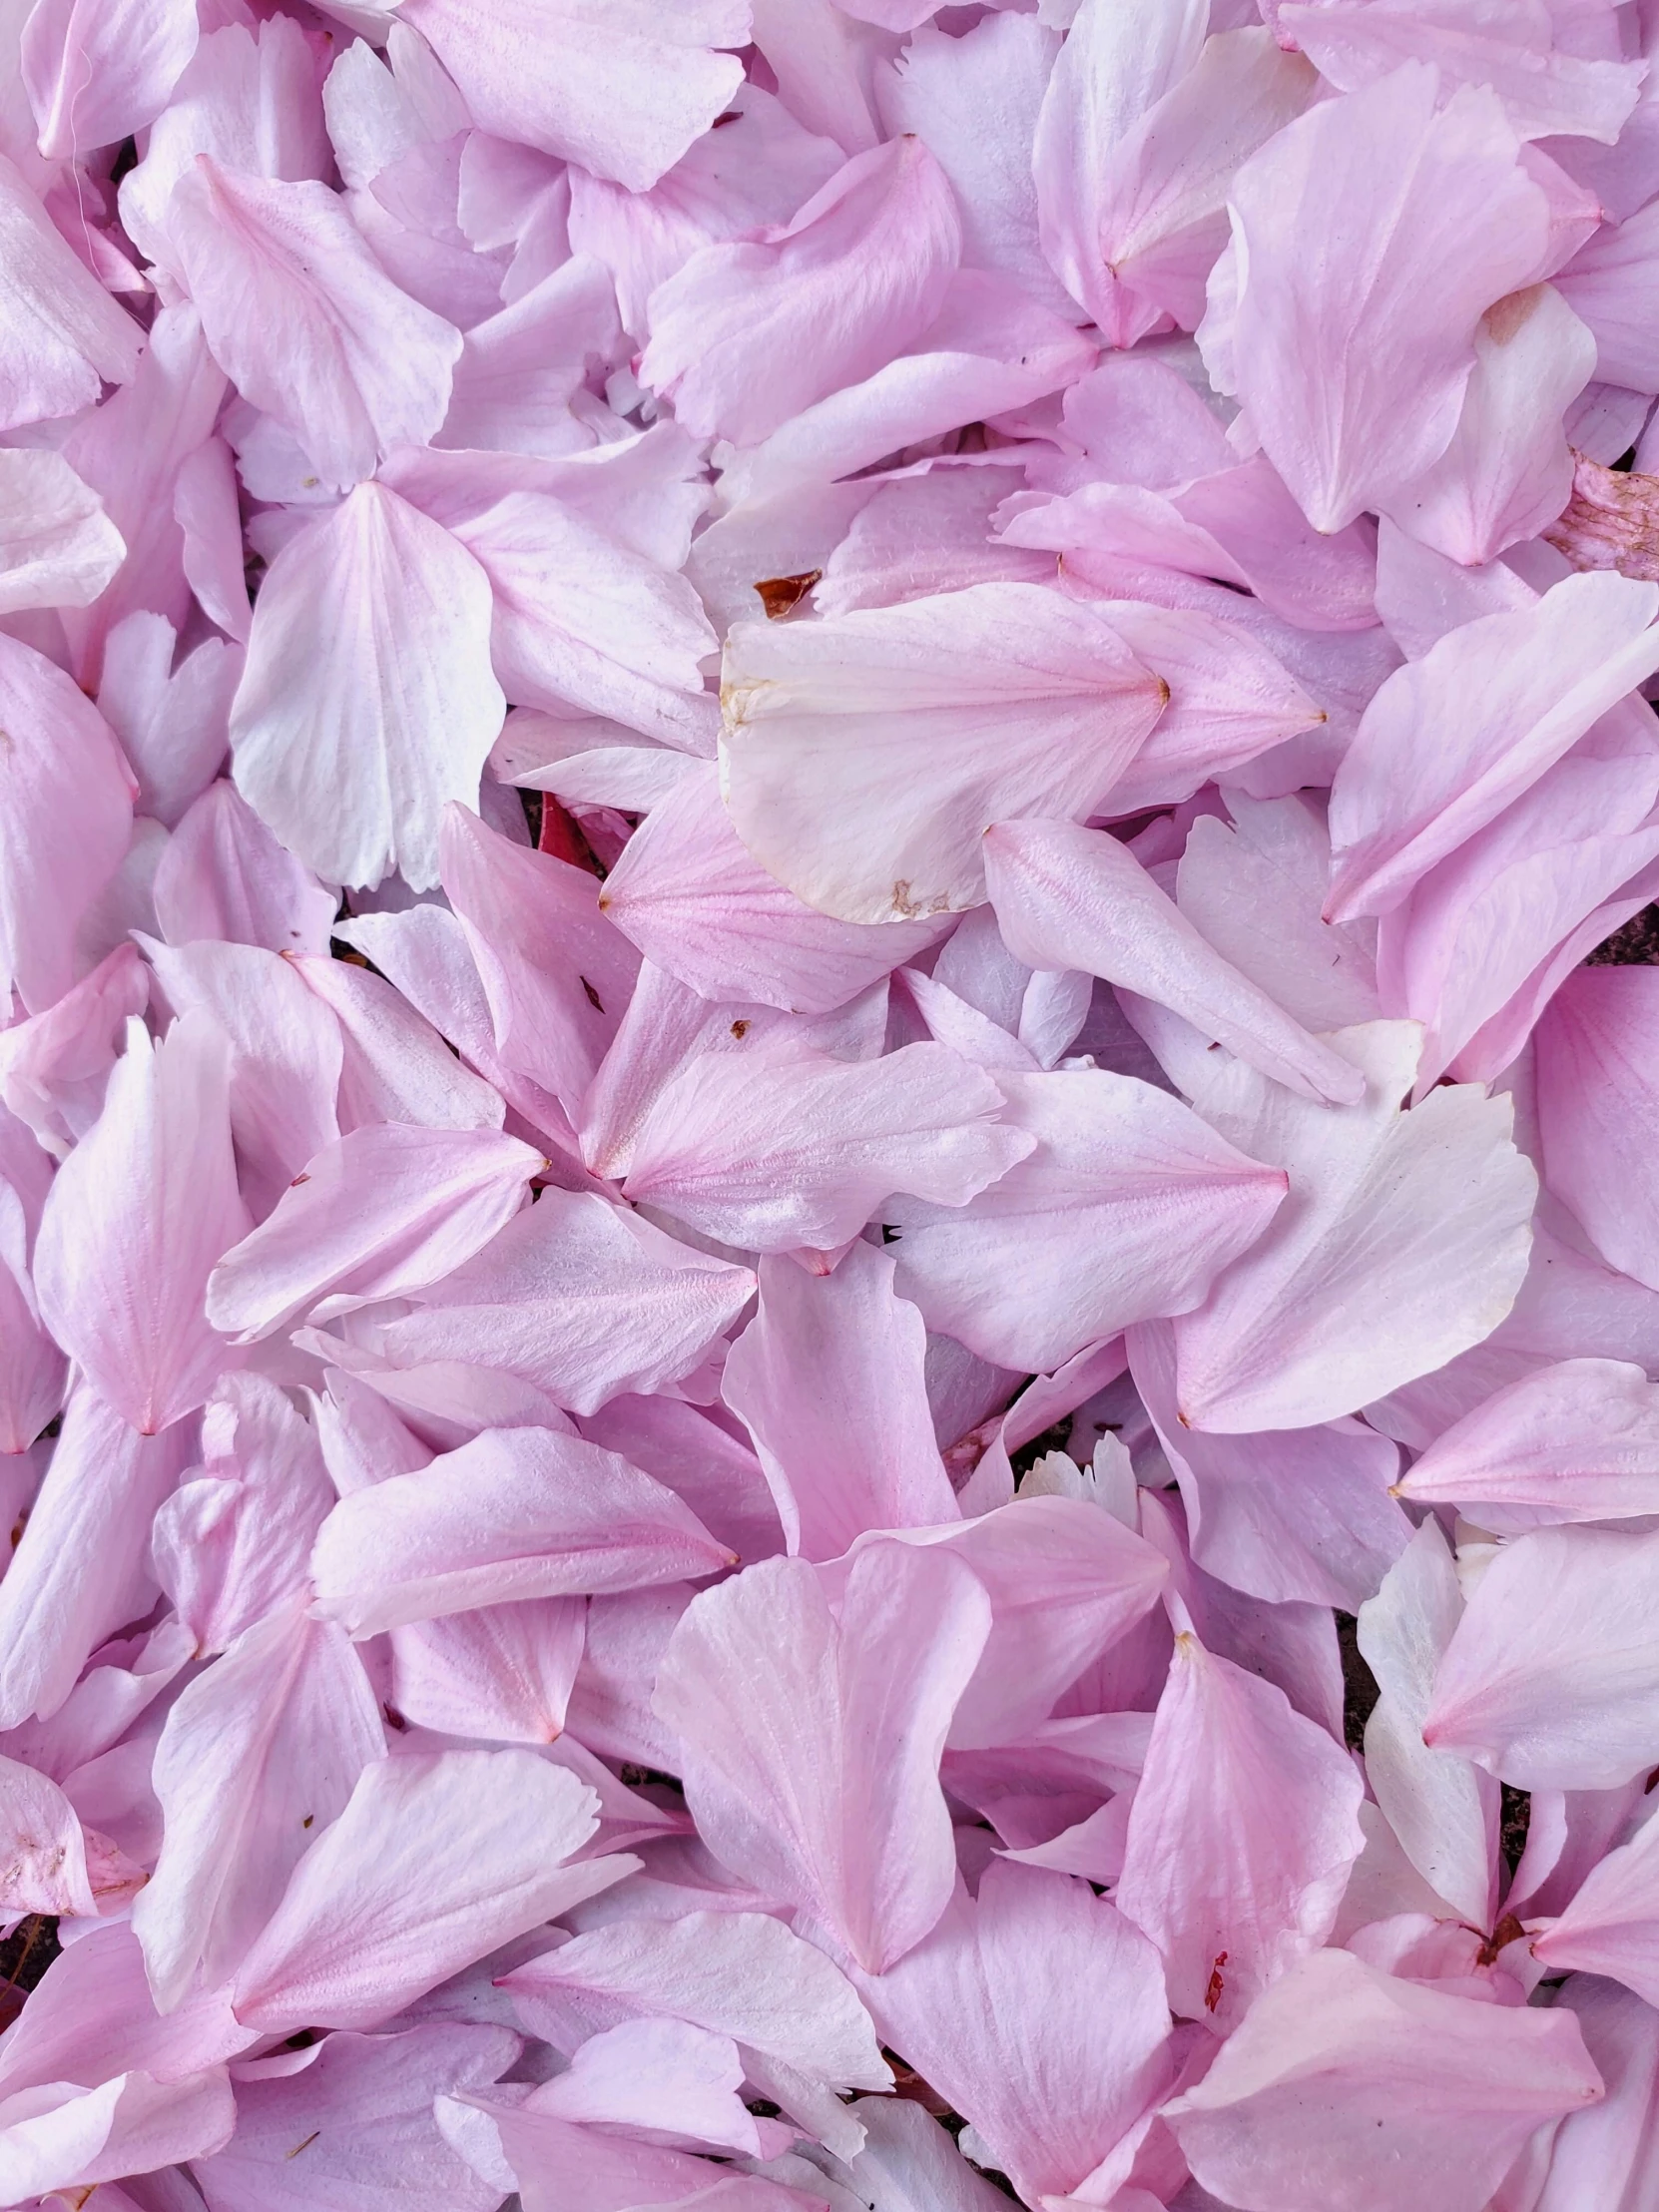 a large amount of pink petals on display